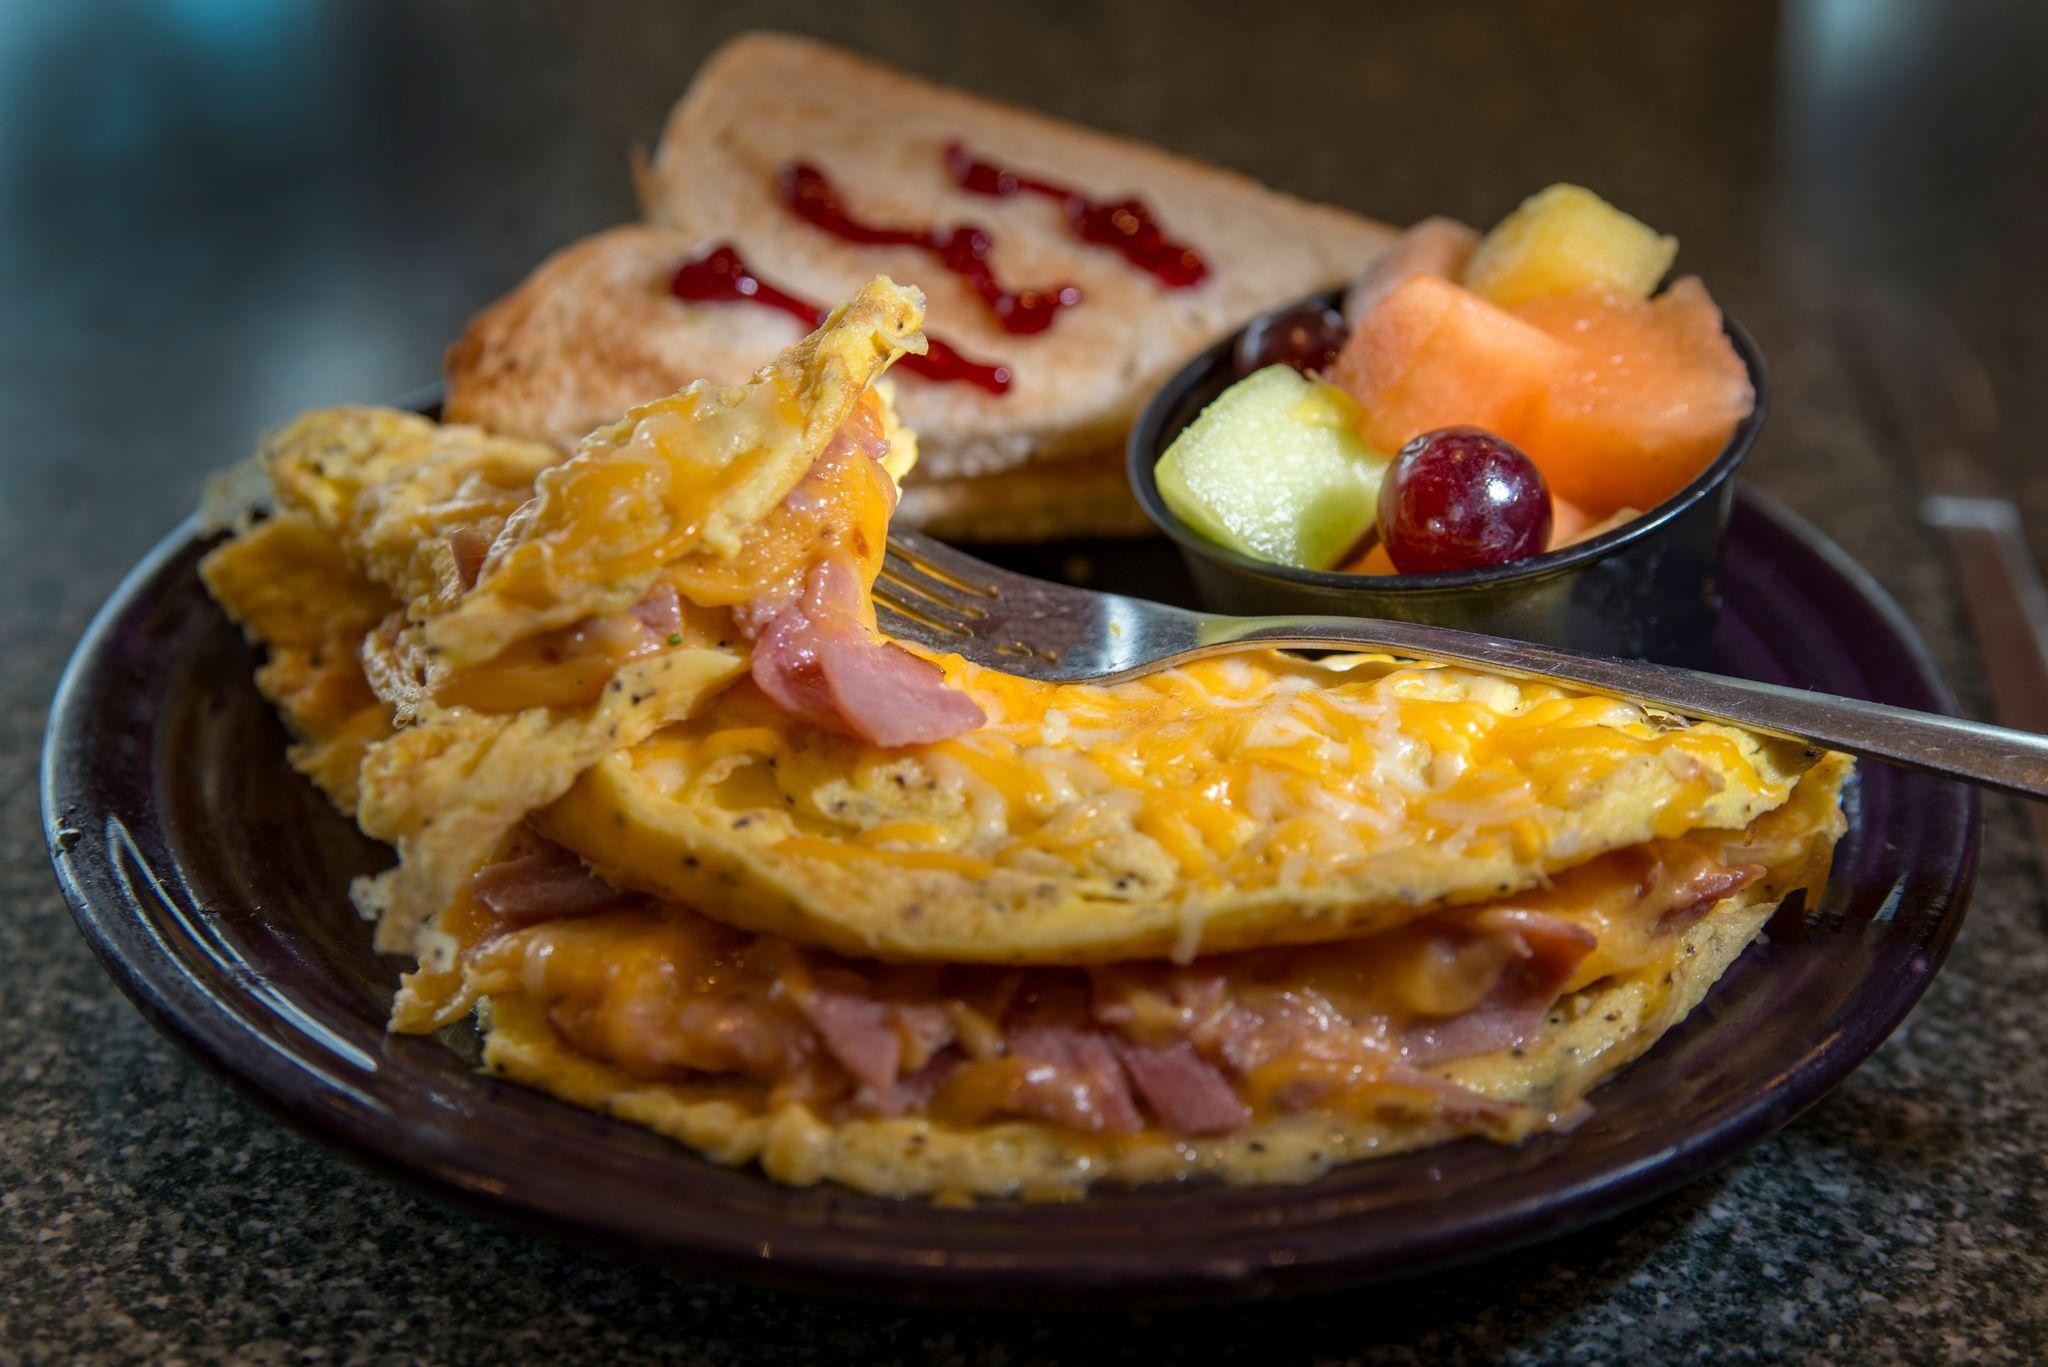 HAM & CHEESE OMELET